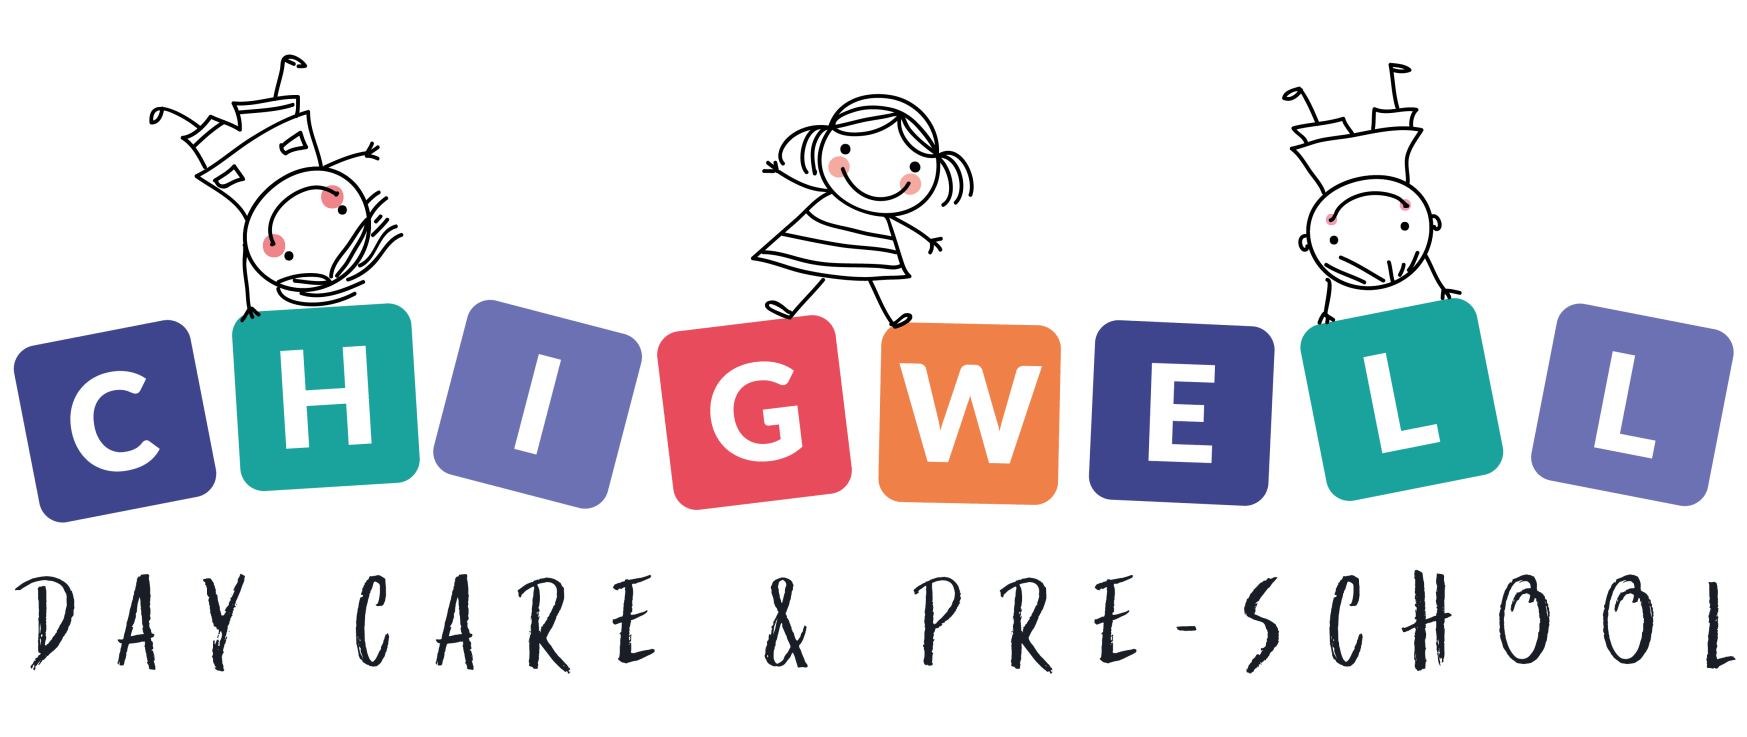 Chigwell Day Care & Pre-School - Home